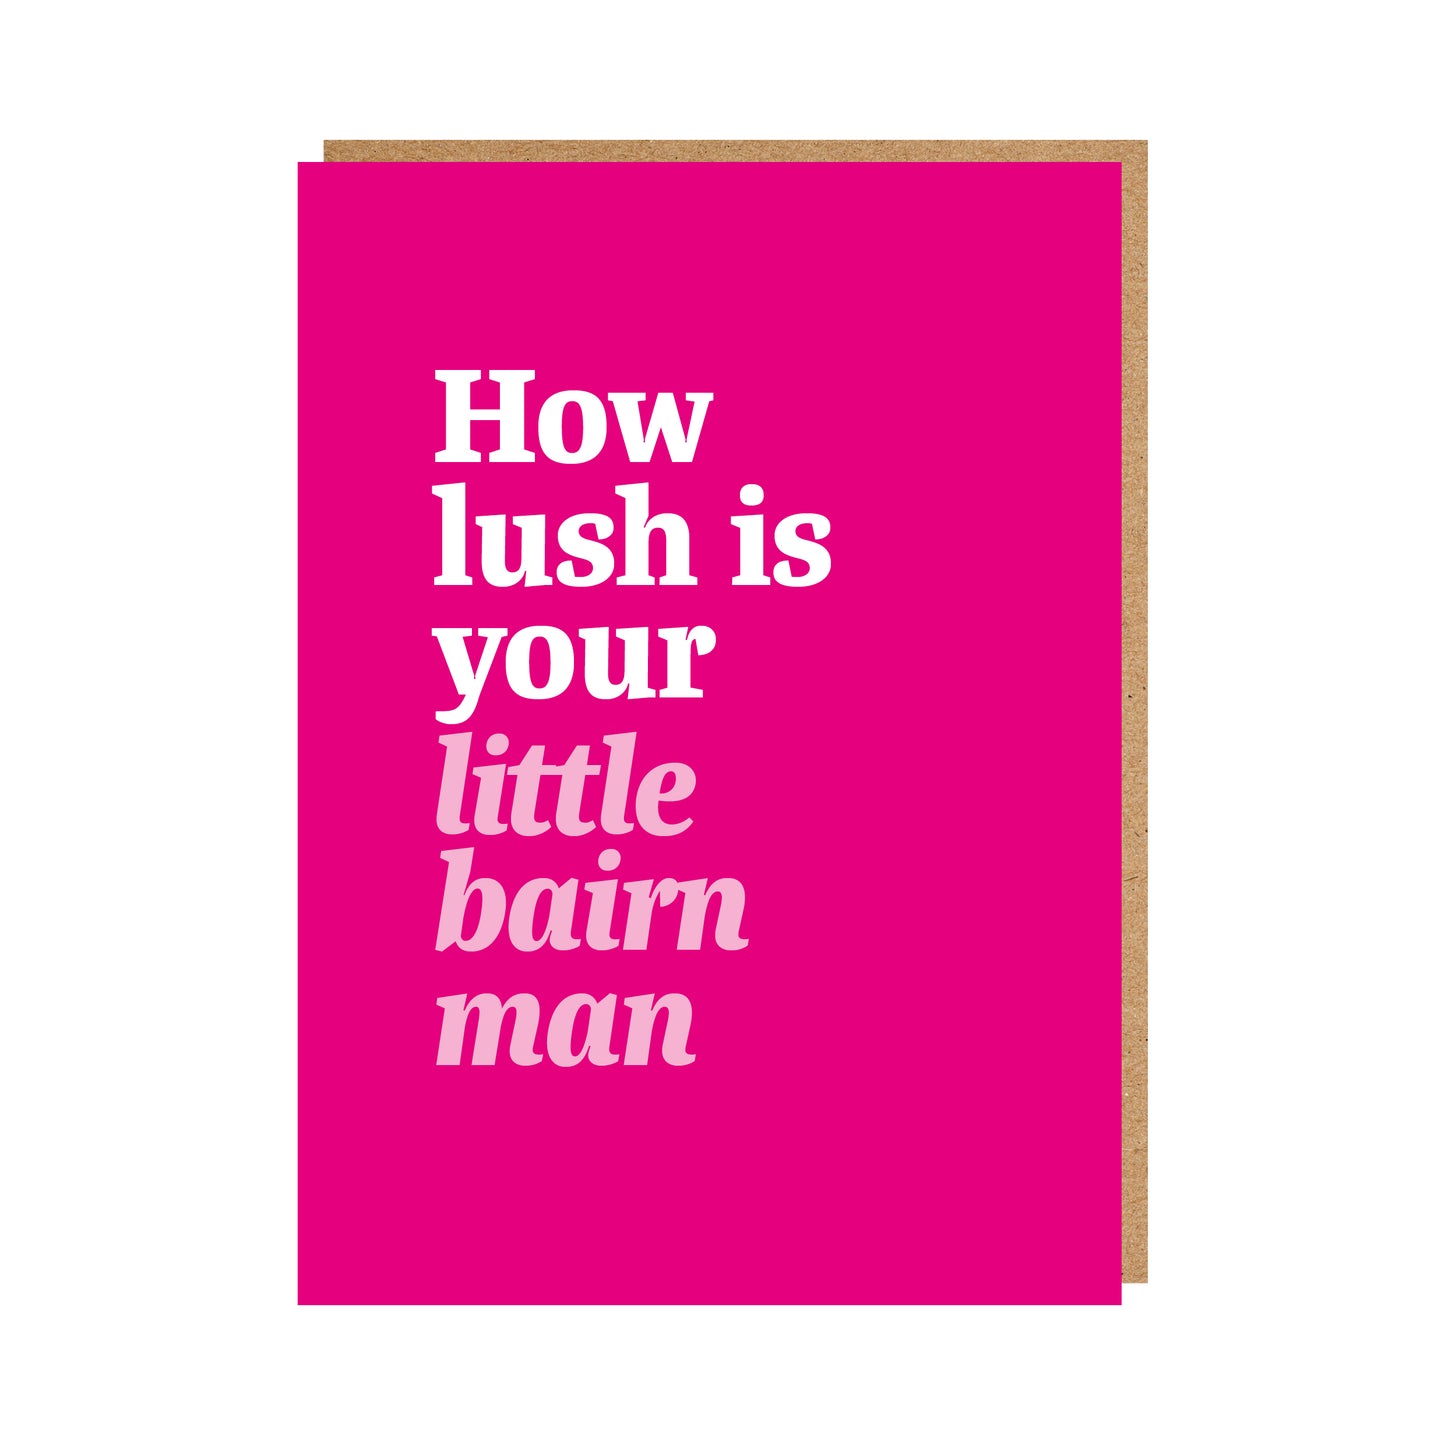 Geordie New Baby Card with text "How lush is your little bairn man"